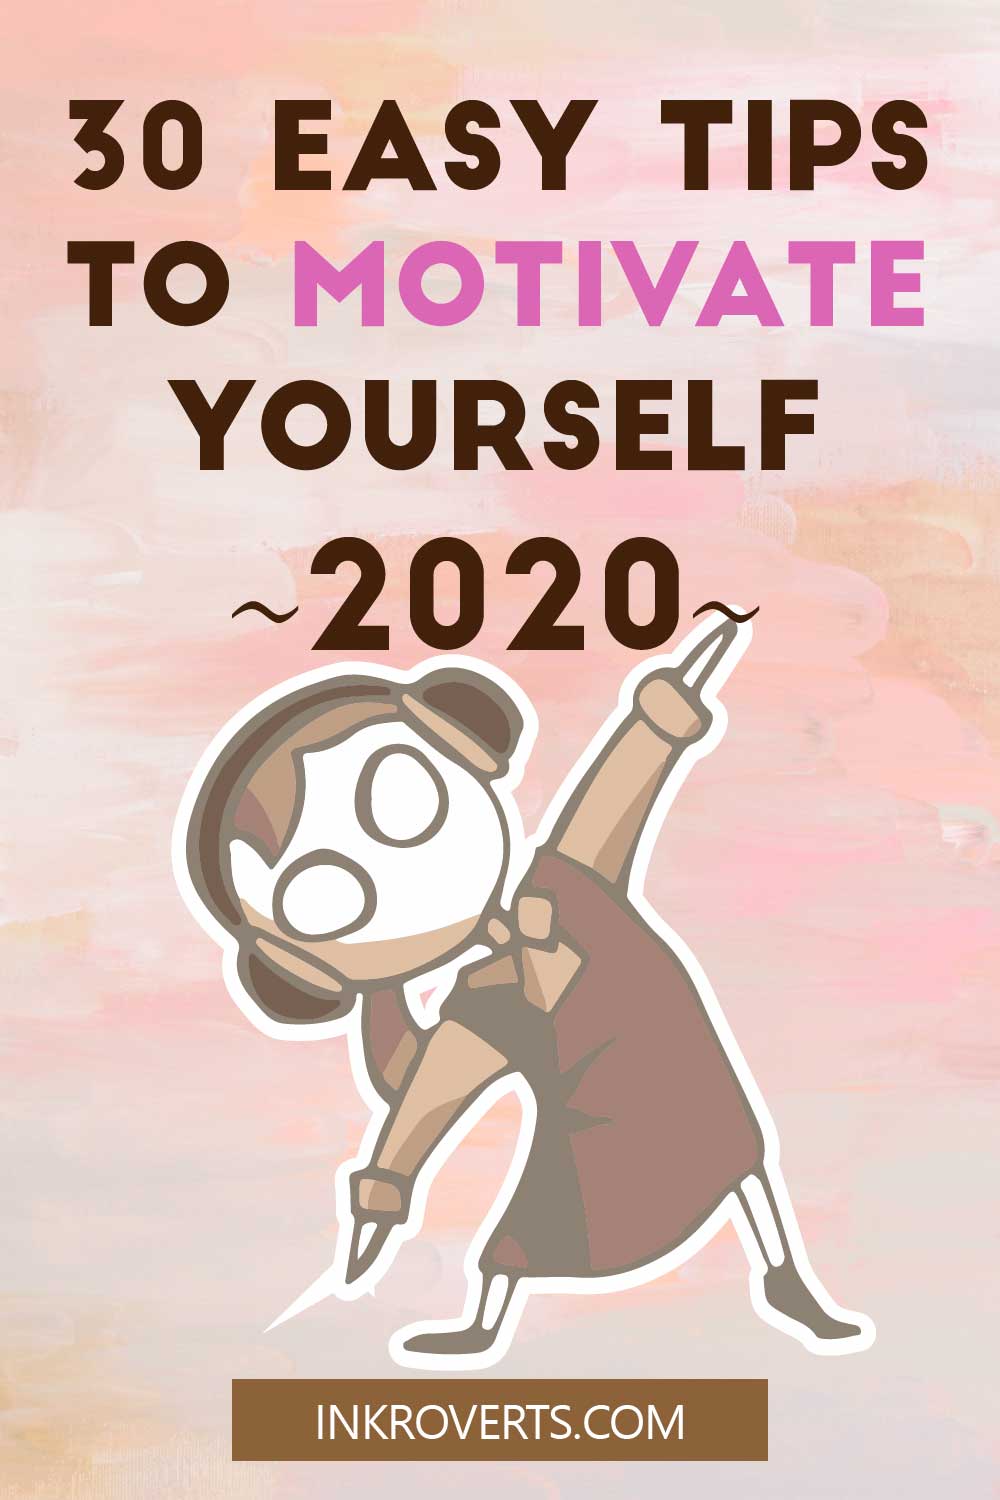 How to Motivate Yourself in 30+ Ways